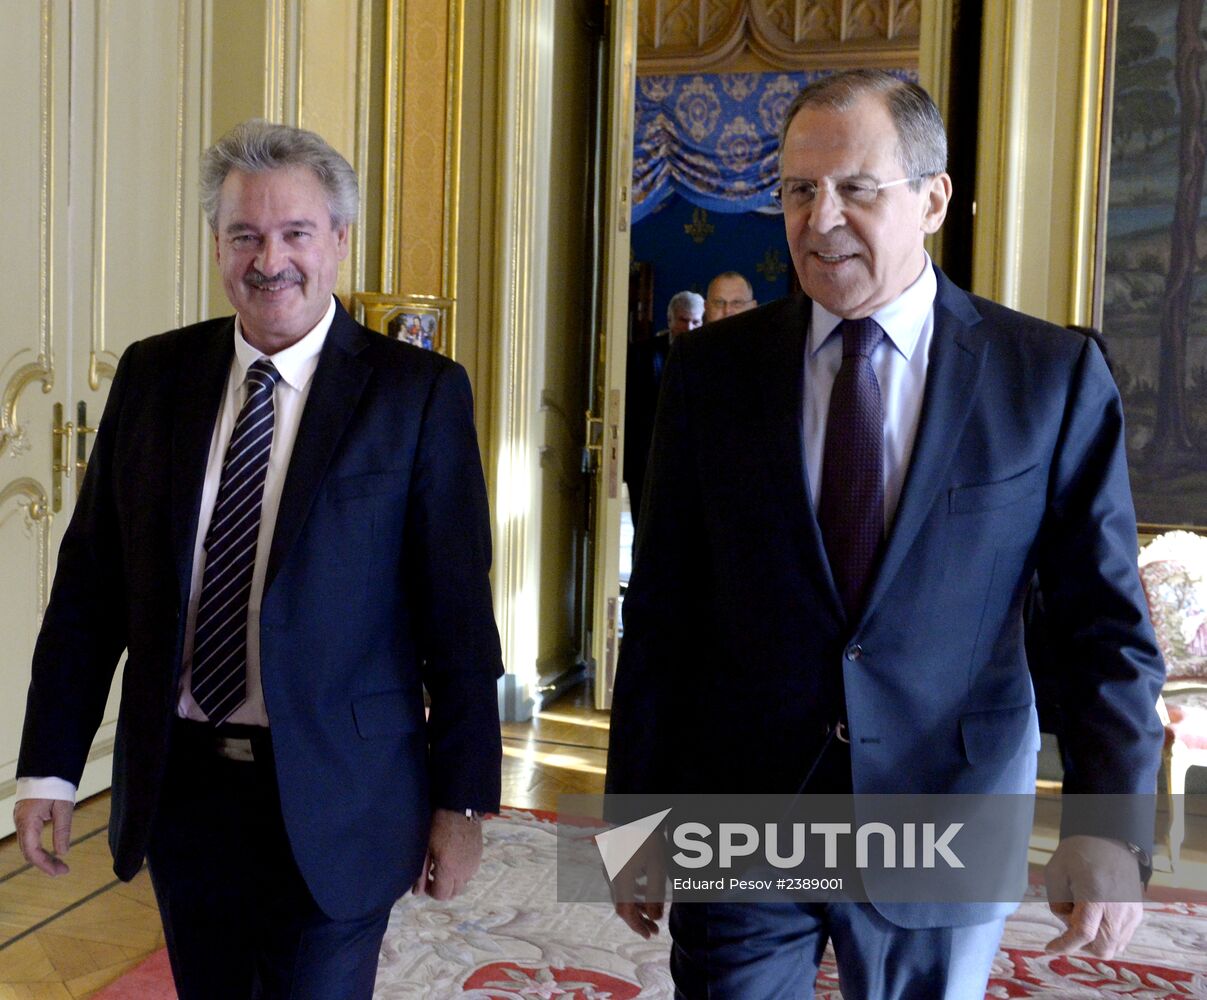 Meeting of Russia's, Luxemburg's foreign ministers